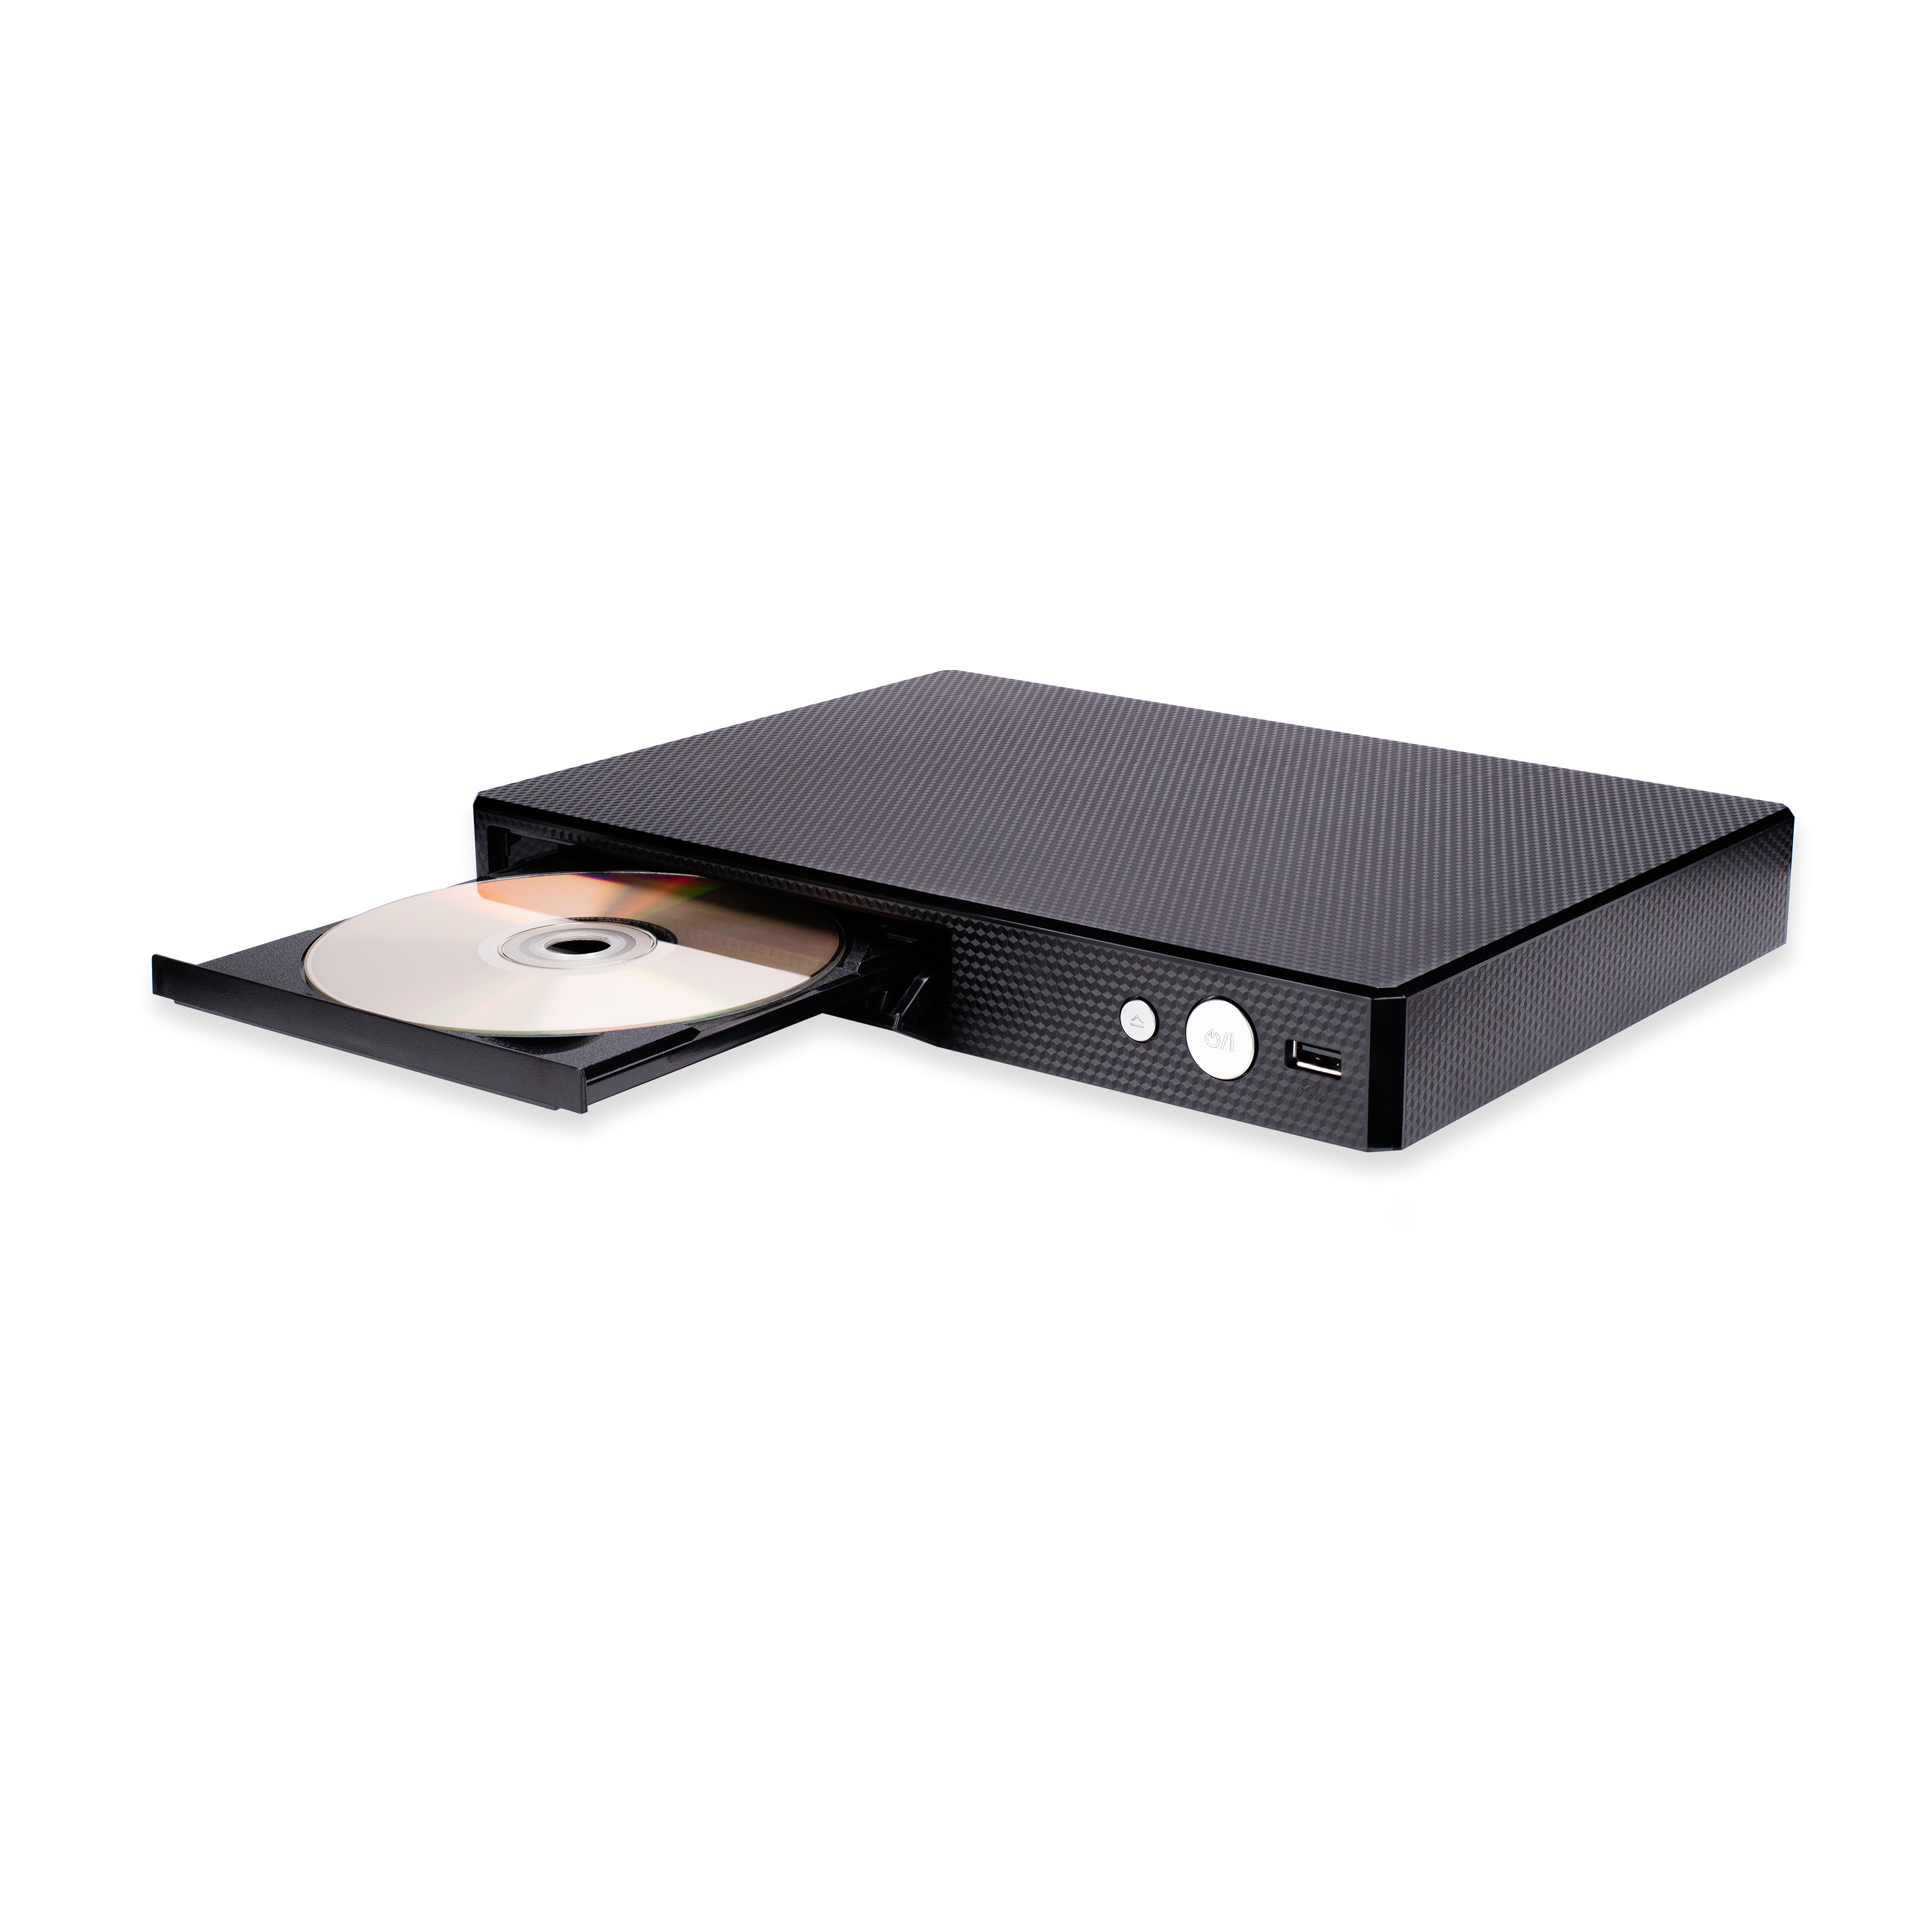 LG BPM26 Blu-ray Player with Streaming Services - image 3 of 10